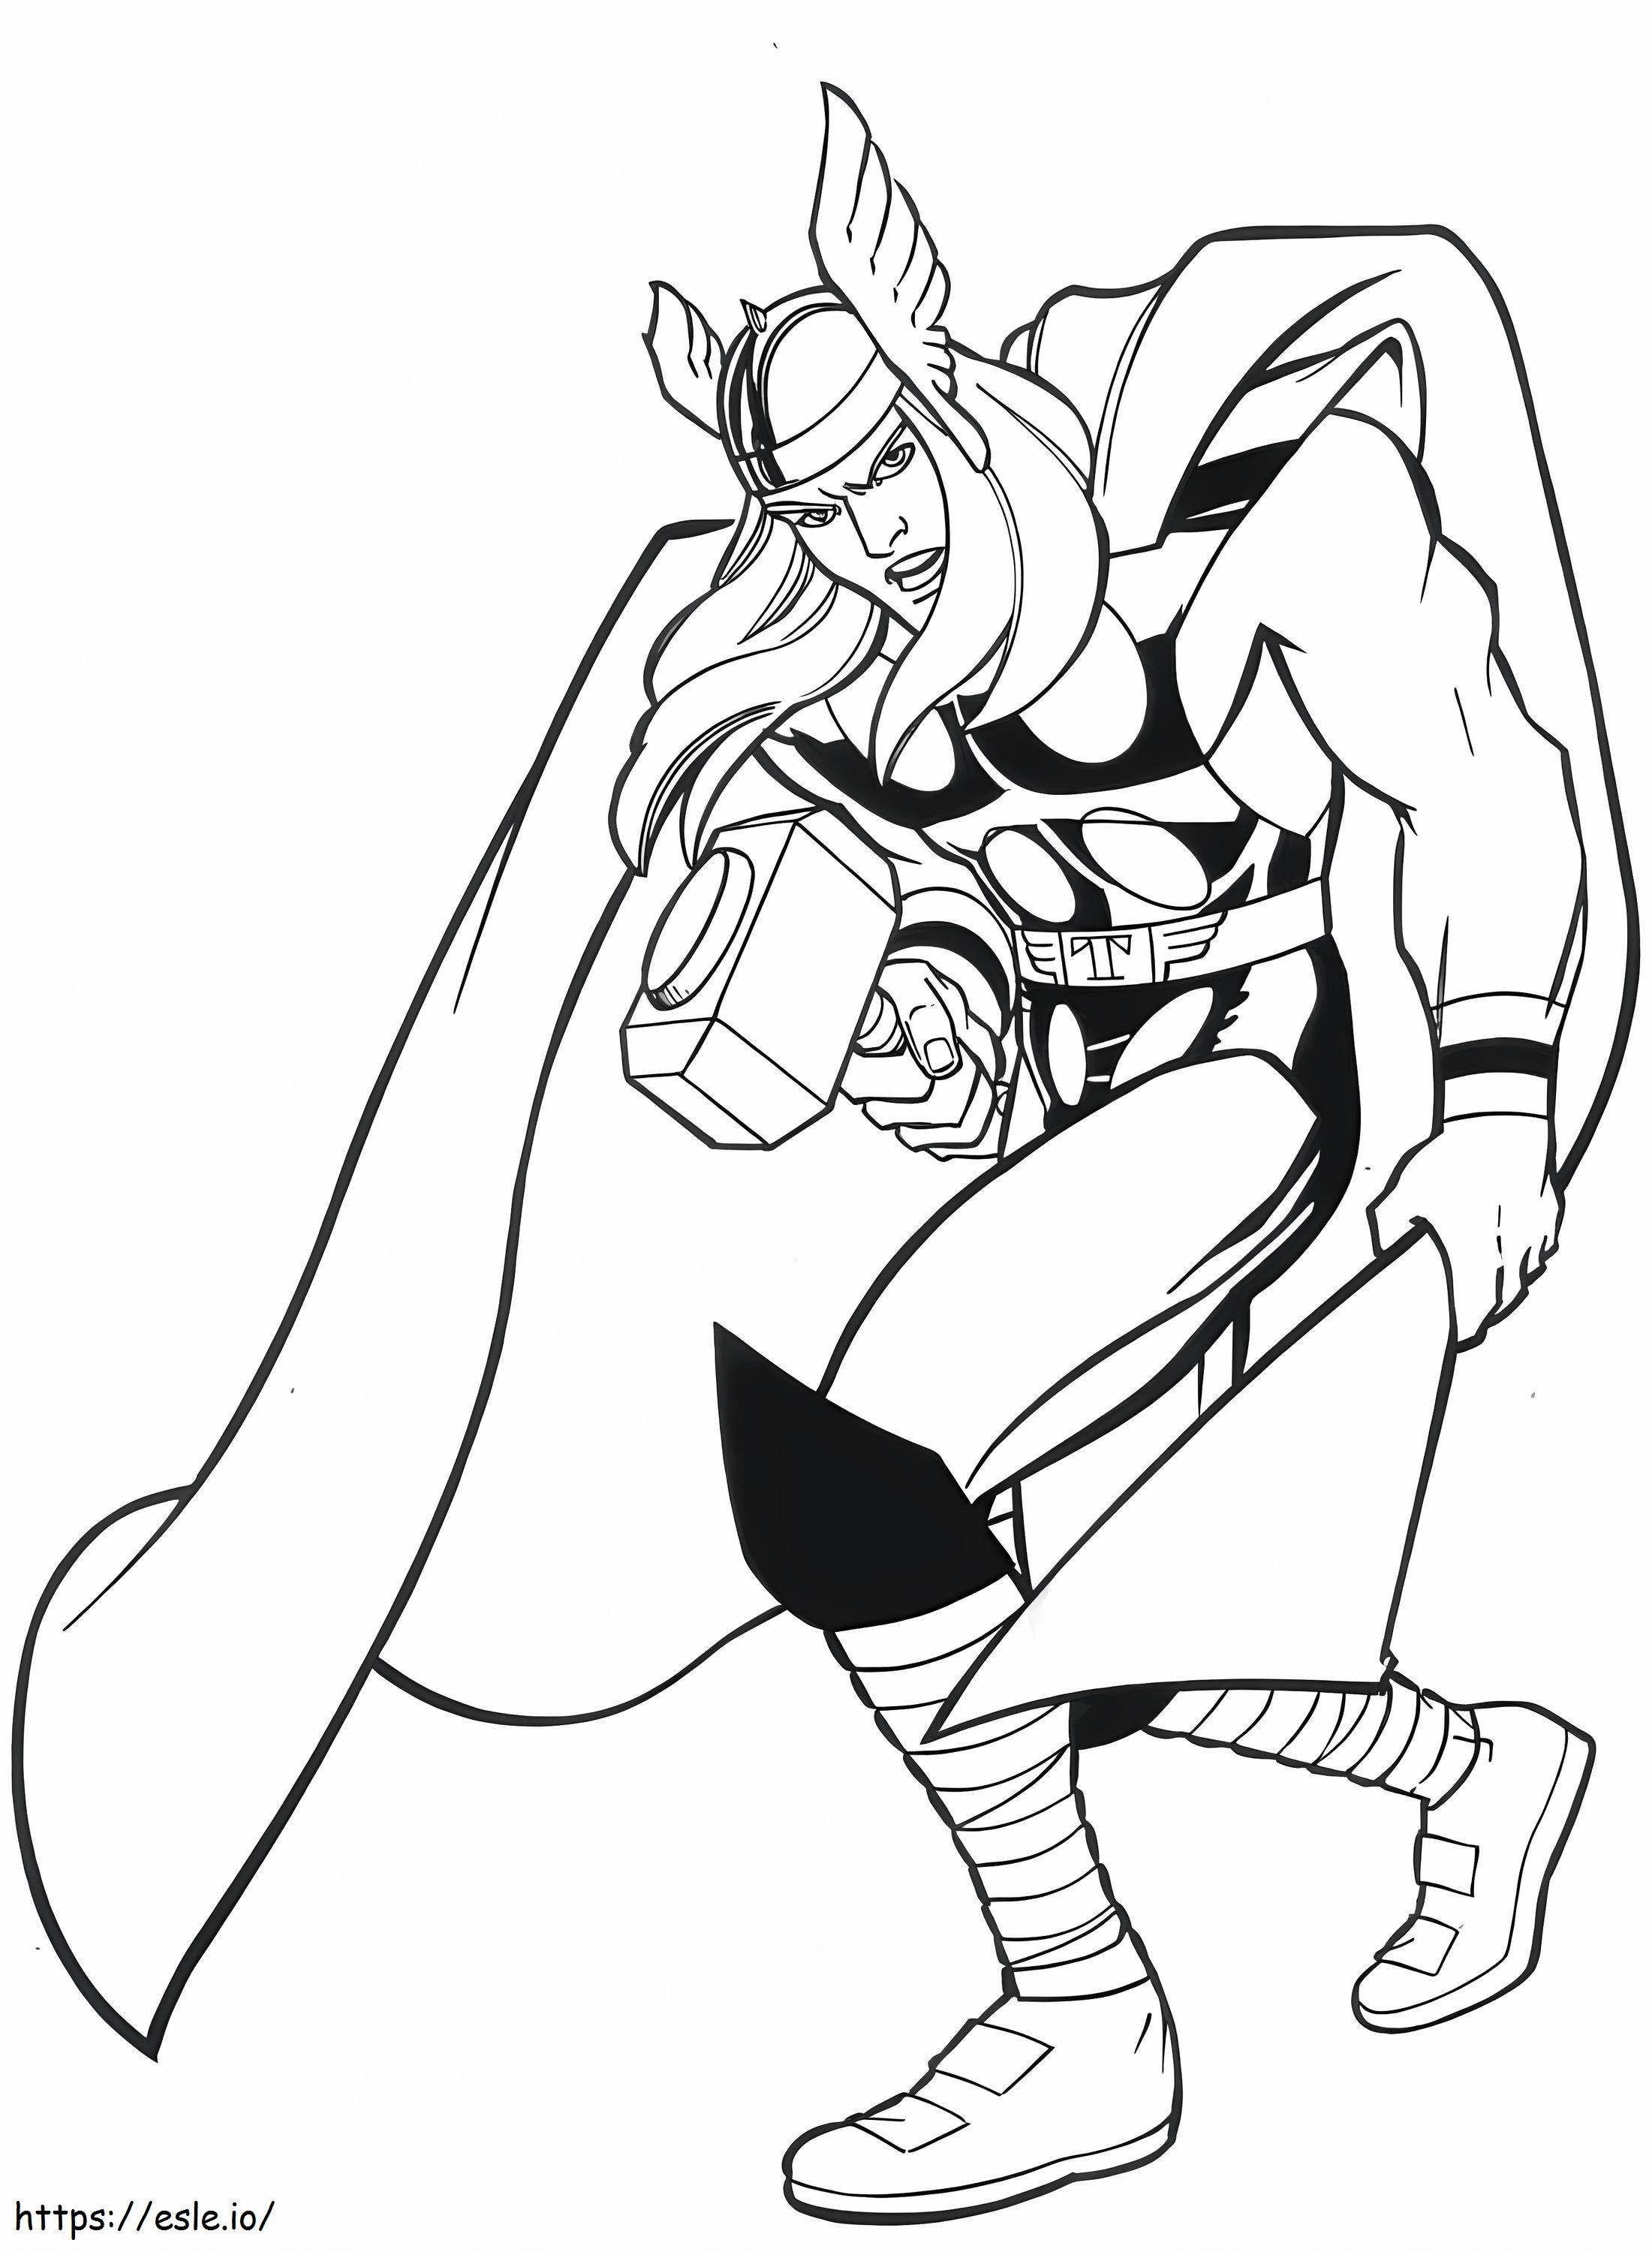 Angry Thor coloring page